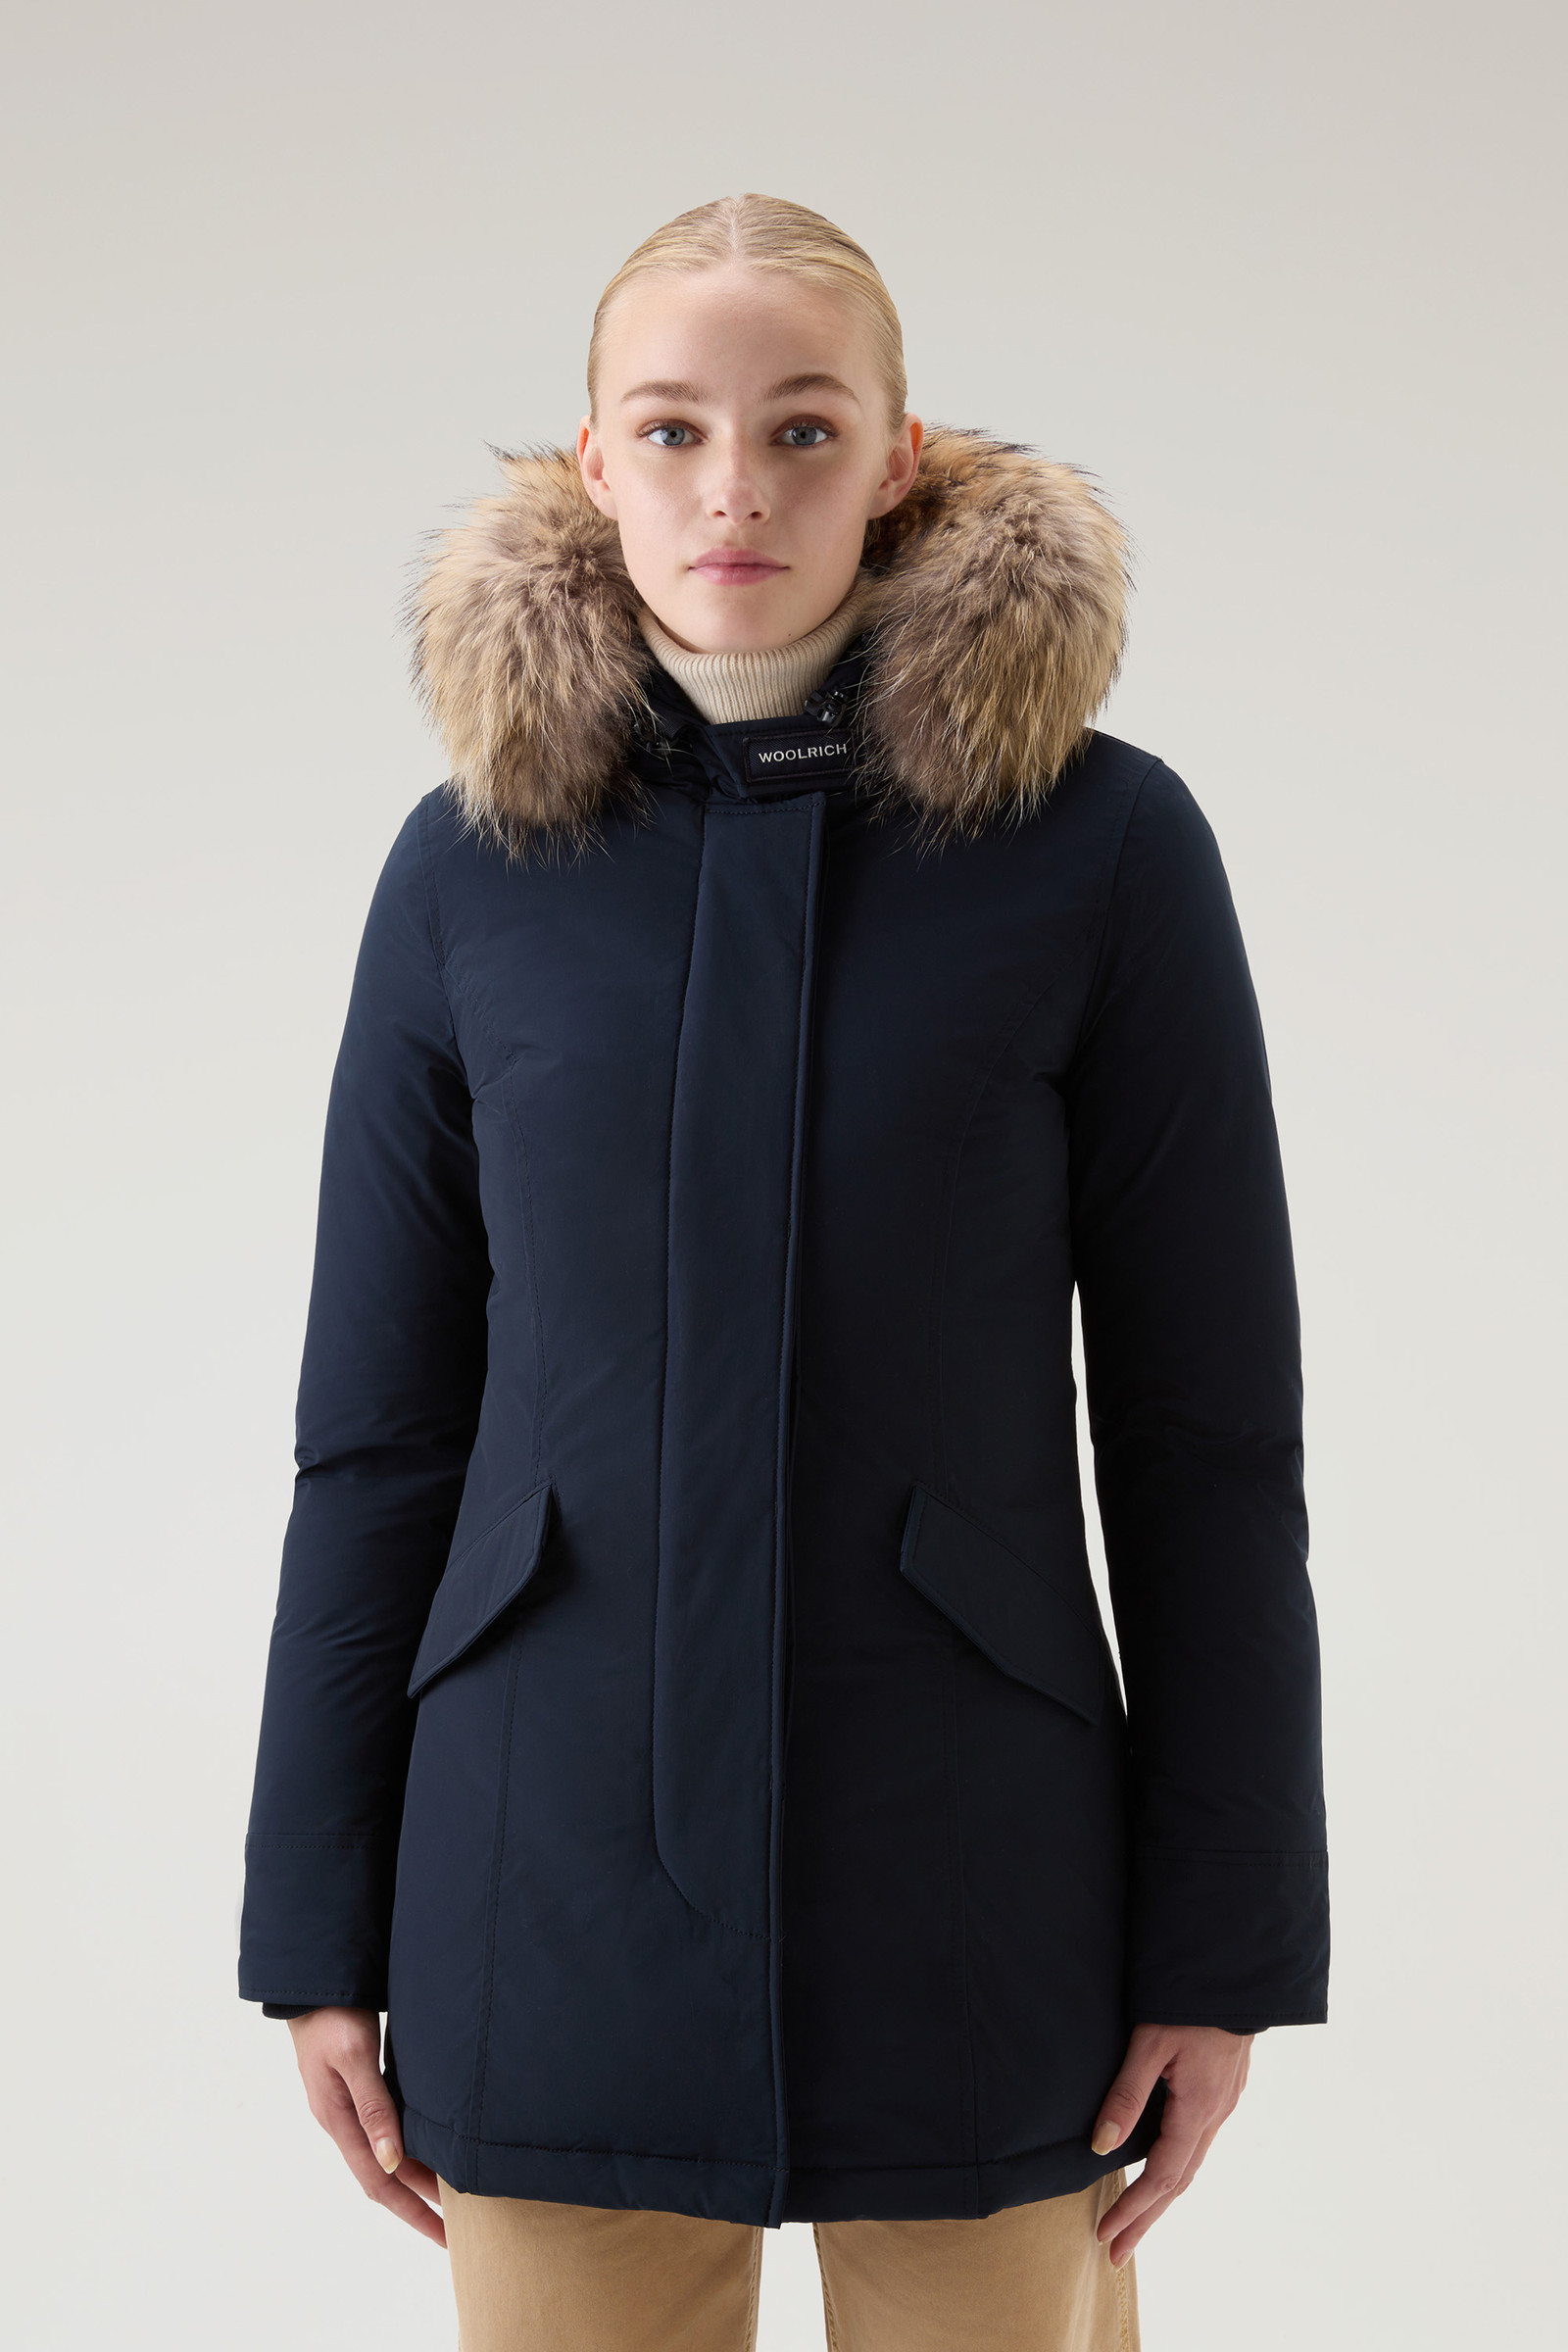 Arctic Parka in Urban Touch with Detachable Fur Blue | Woolrich USA